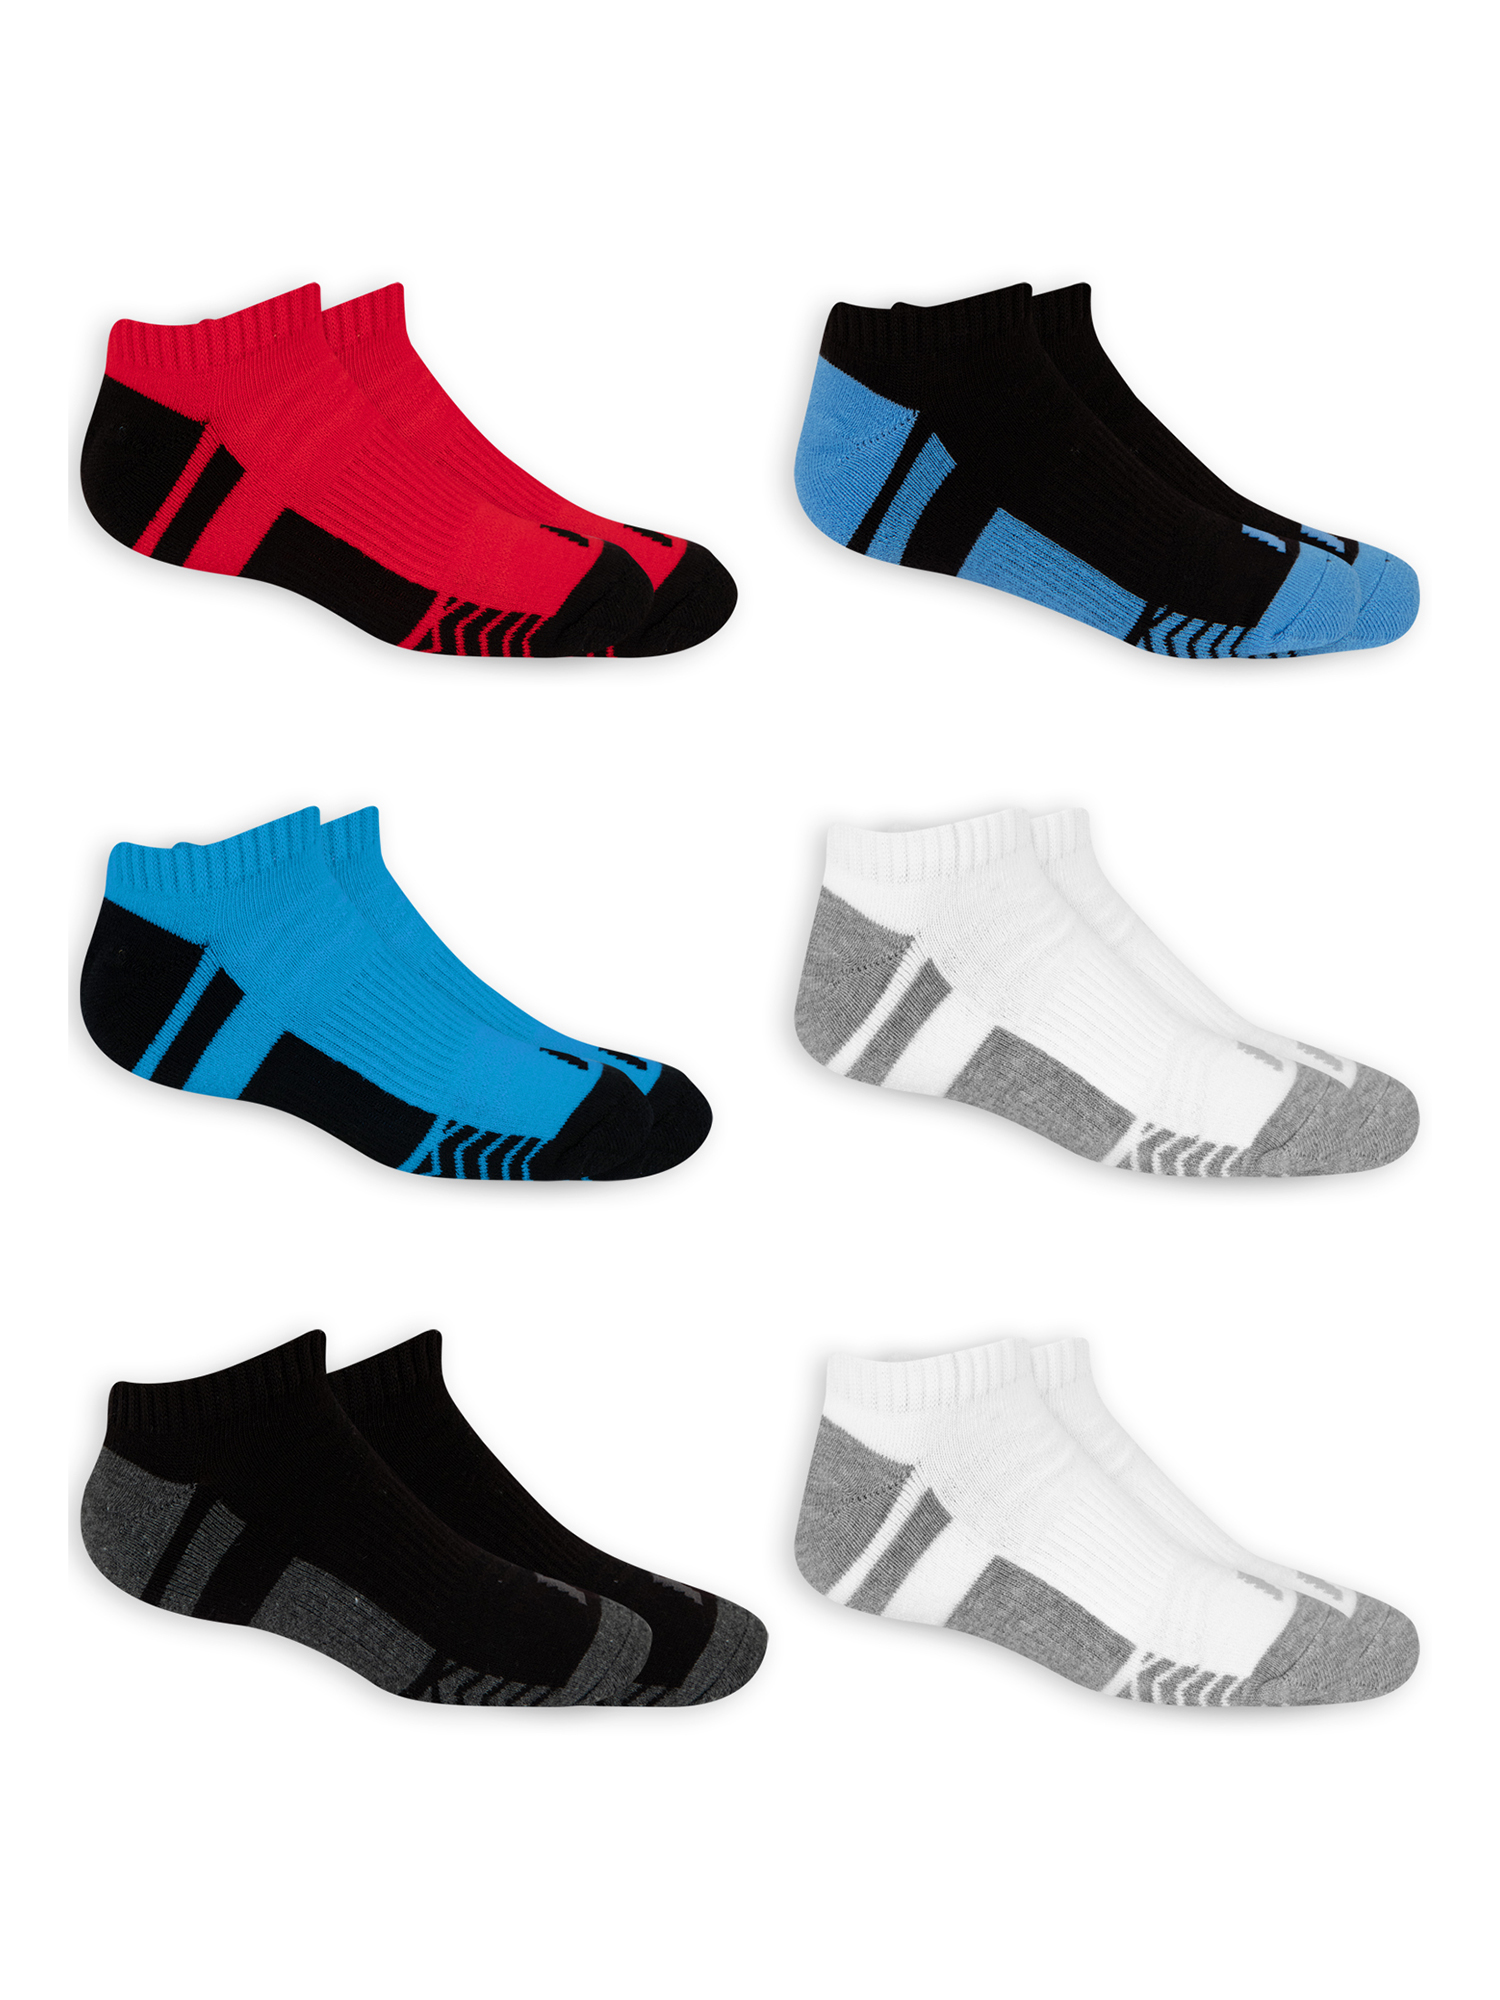 Russell Active Boys No Show Socks 6 Pack Socks - image 1 of 3